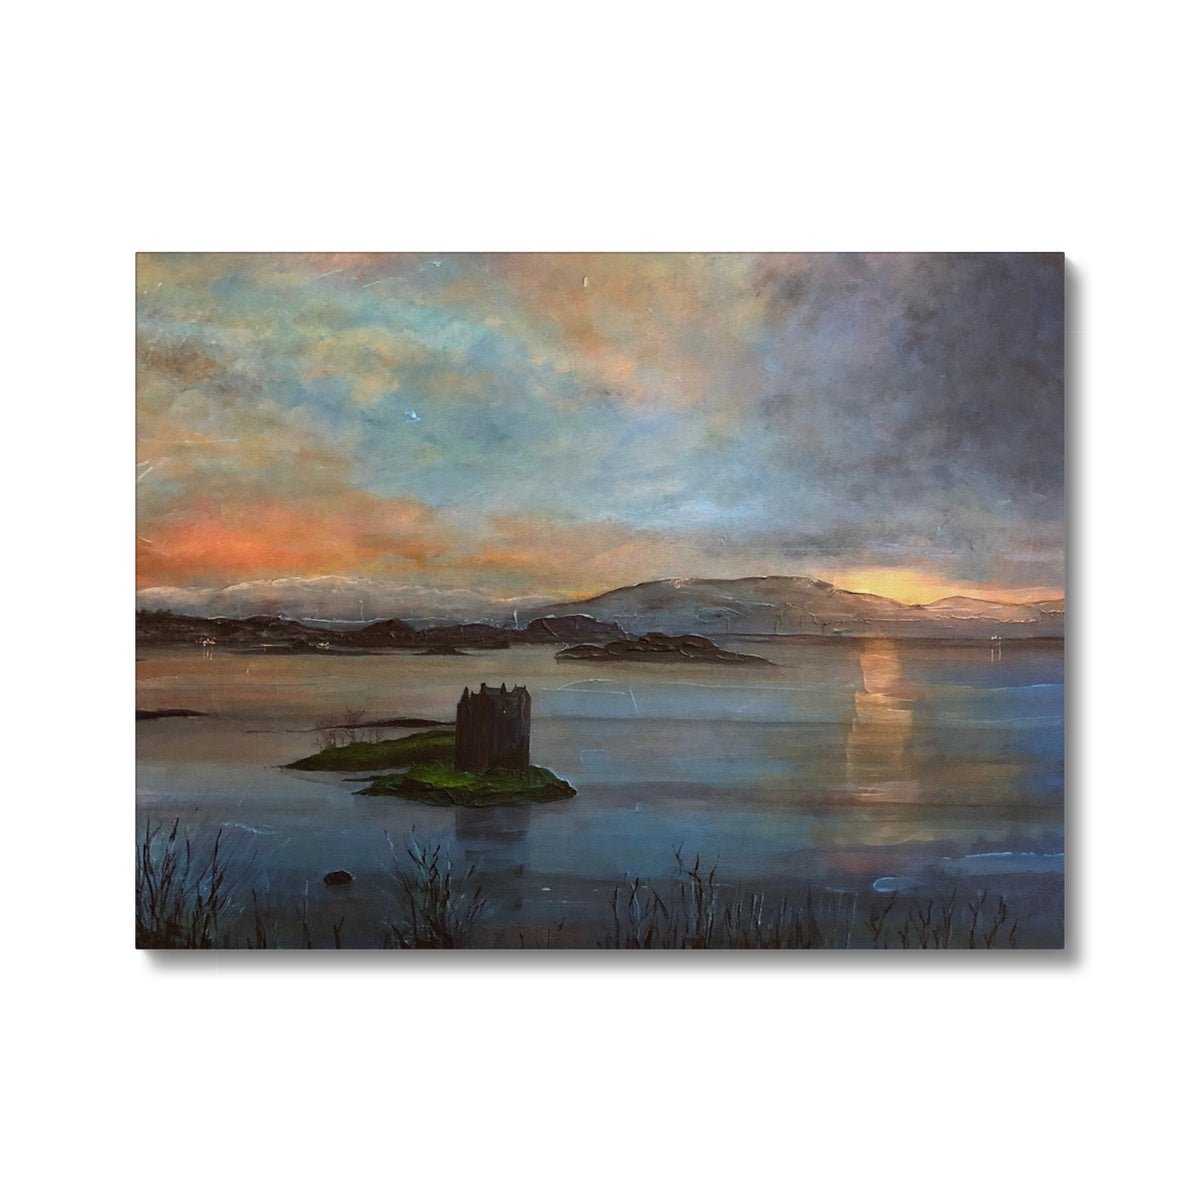 Castle Stalker Twilight Painting | Canvas From Scotland-Contemporary Stretched Canvas Prints-Scottish Castles Art Gallery-24"x18"-Paintings, Prints, Homeware, Art Gifts From Scotland By Scottish Artist Kevin Hunter